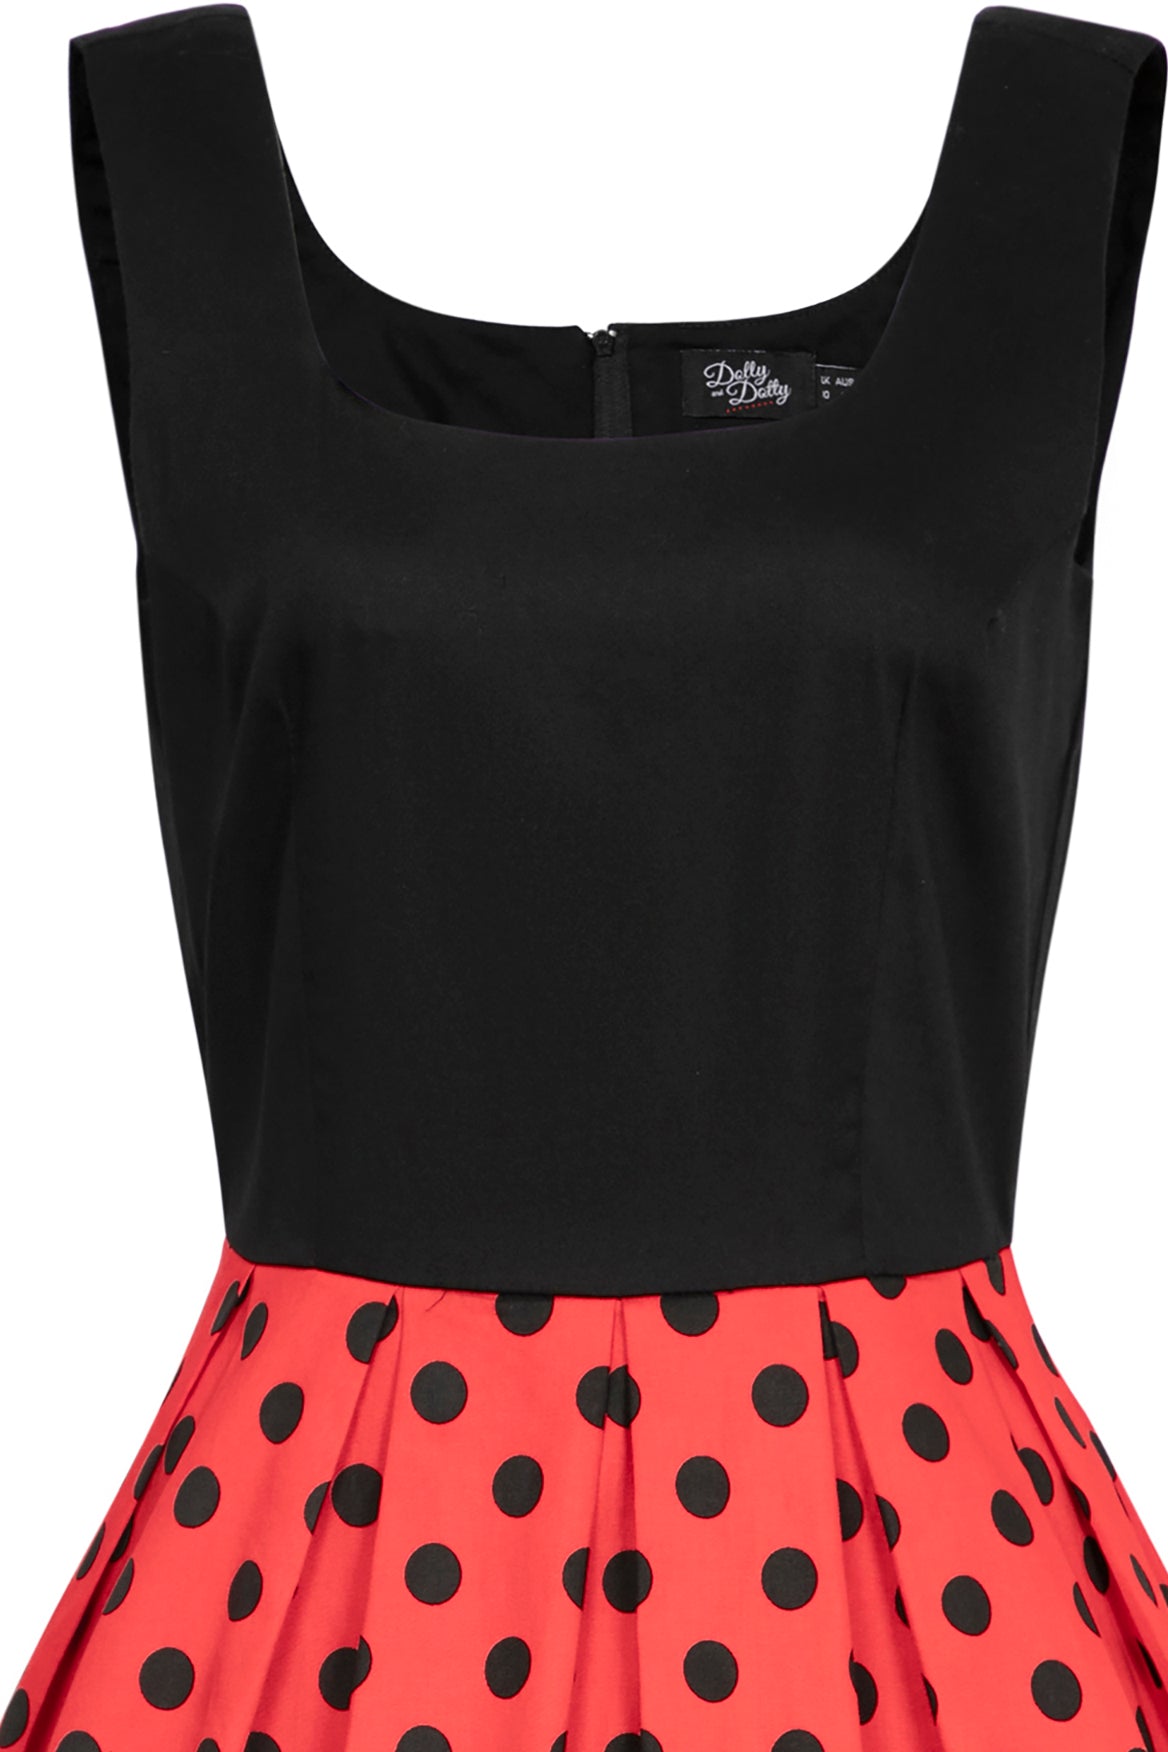 Sleeveless Amanda dress, with black top and red skirt, with black polka dot spots, close view